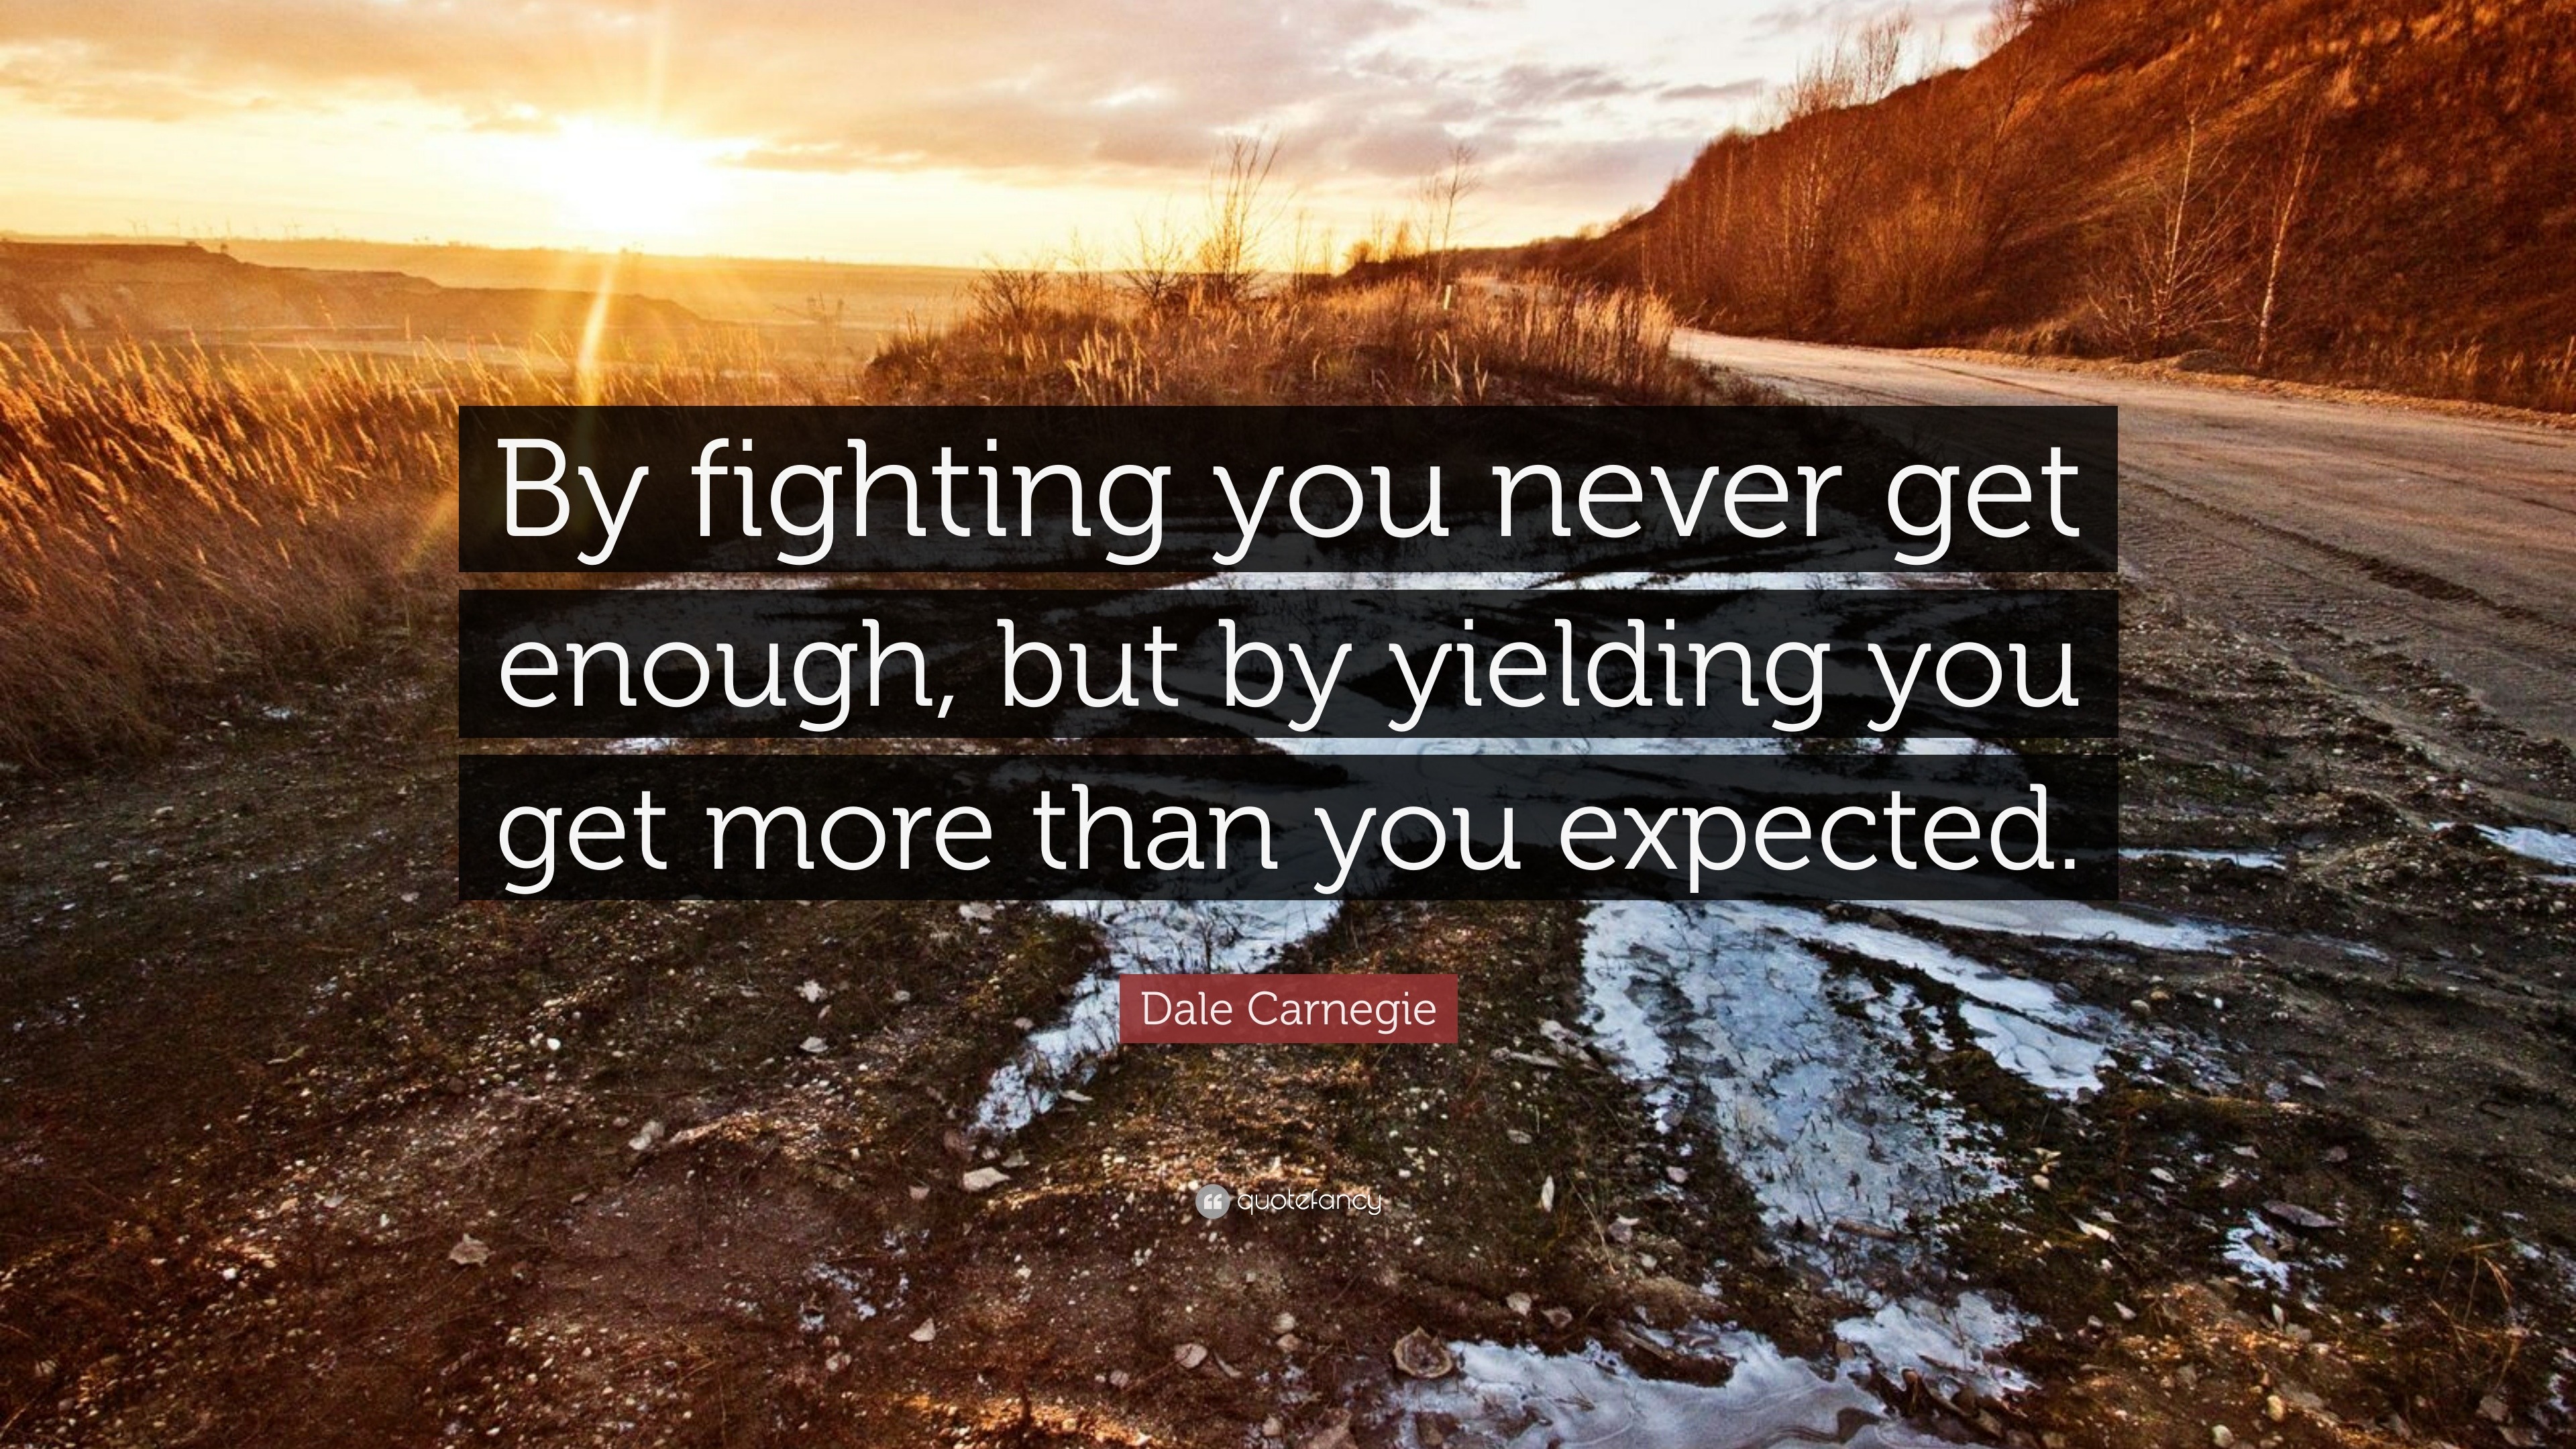 Dale Carnegie Quote: “By fighting you never get enough, but by yielding ...